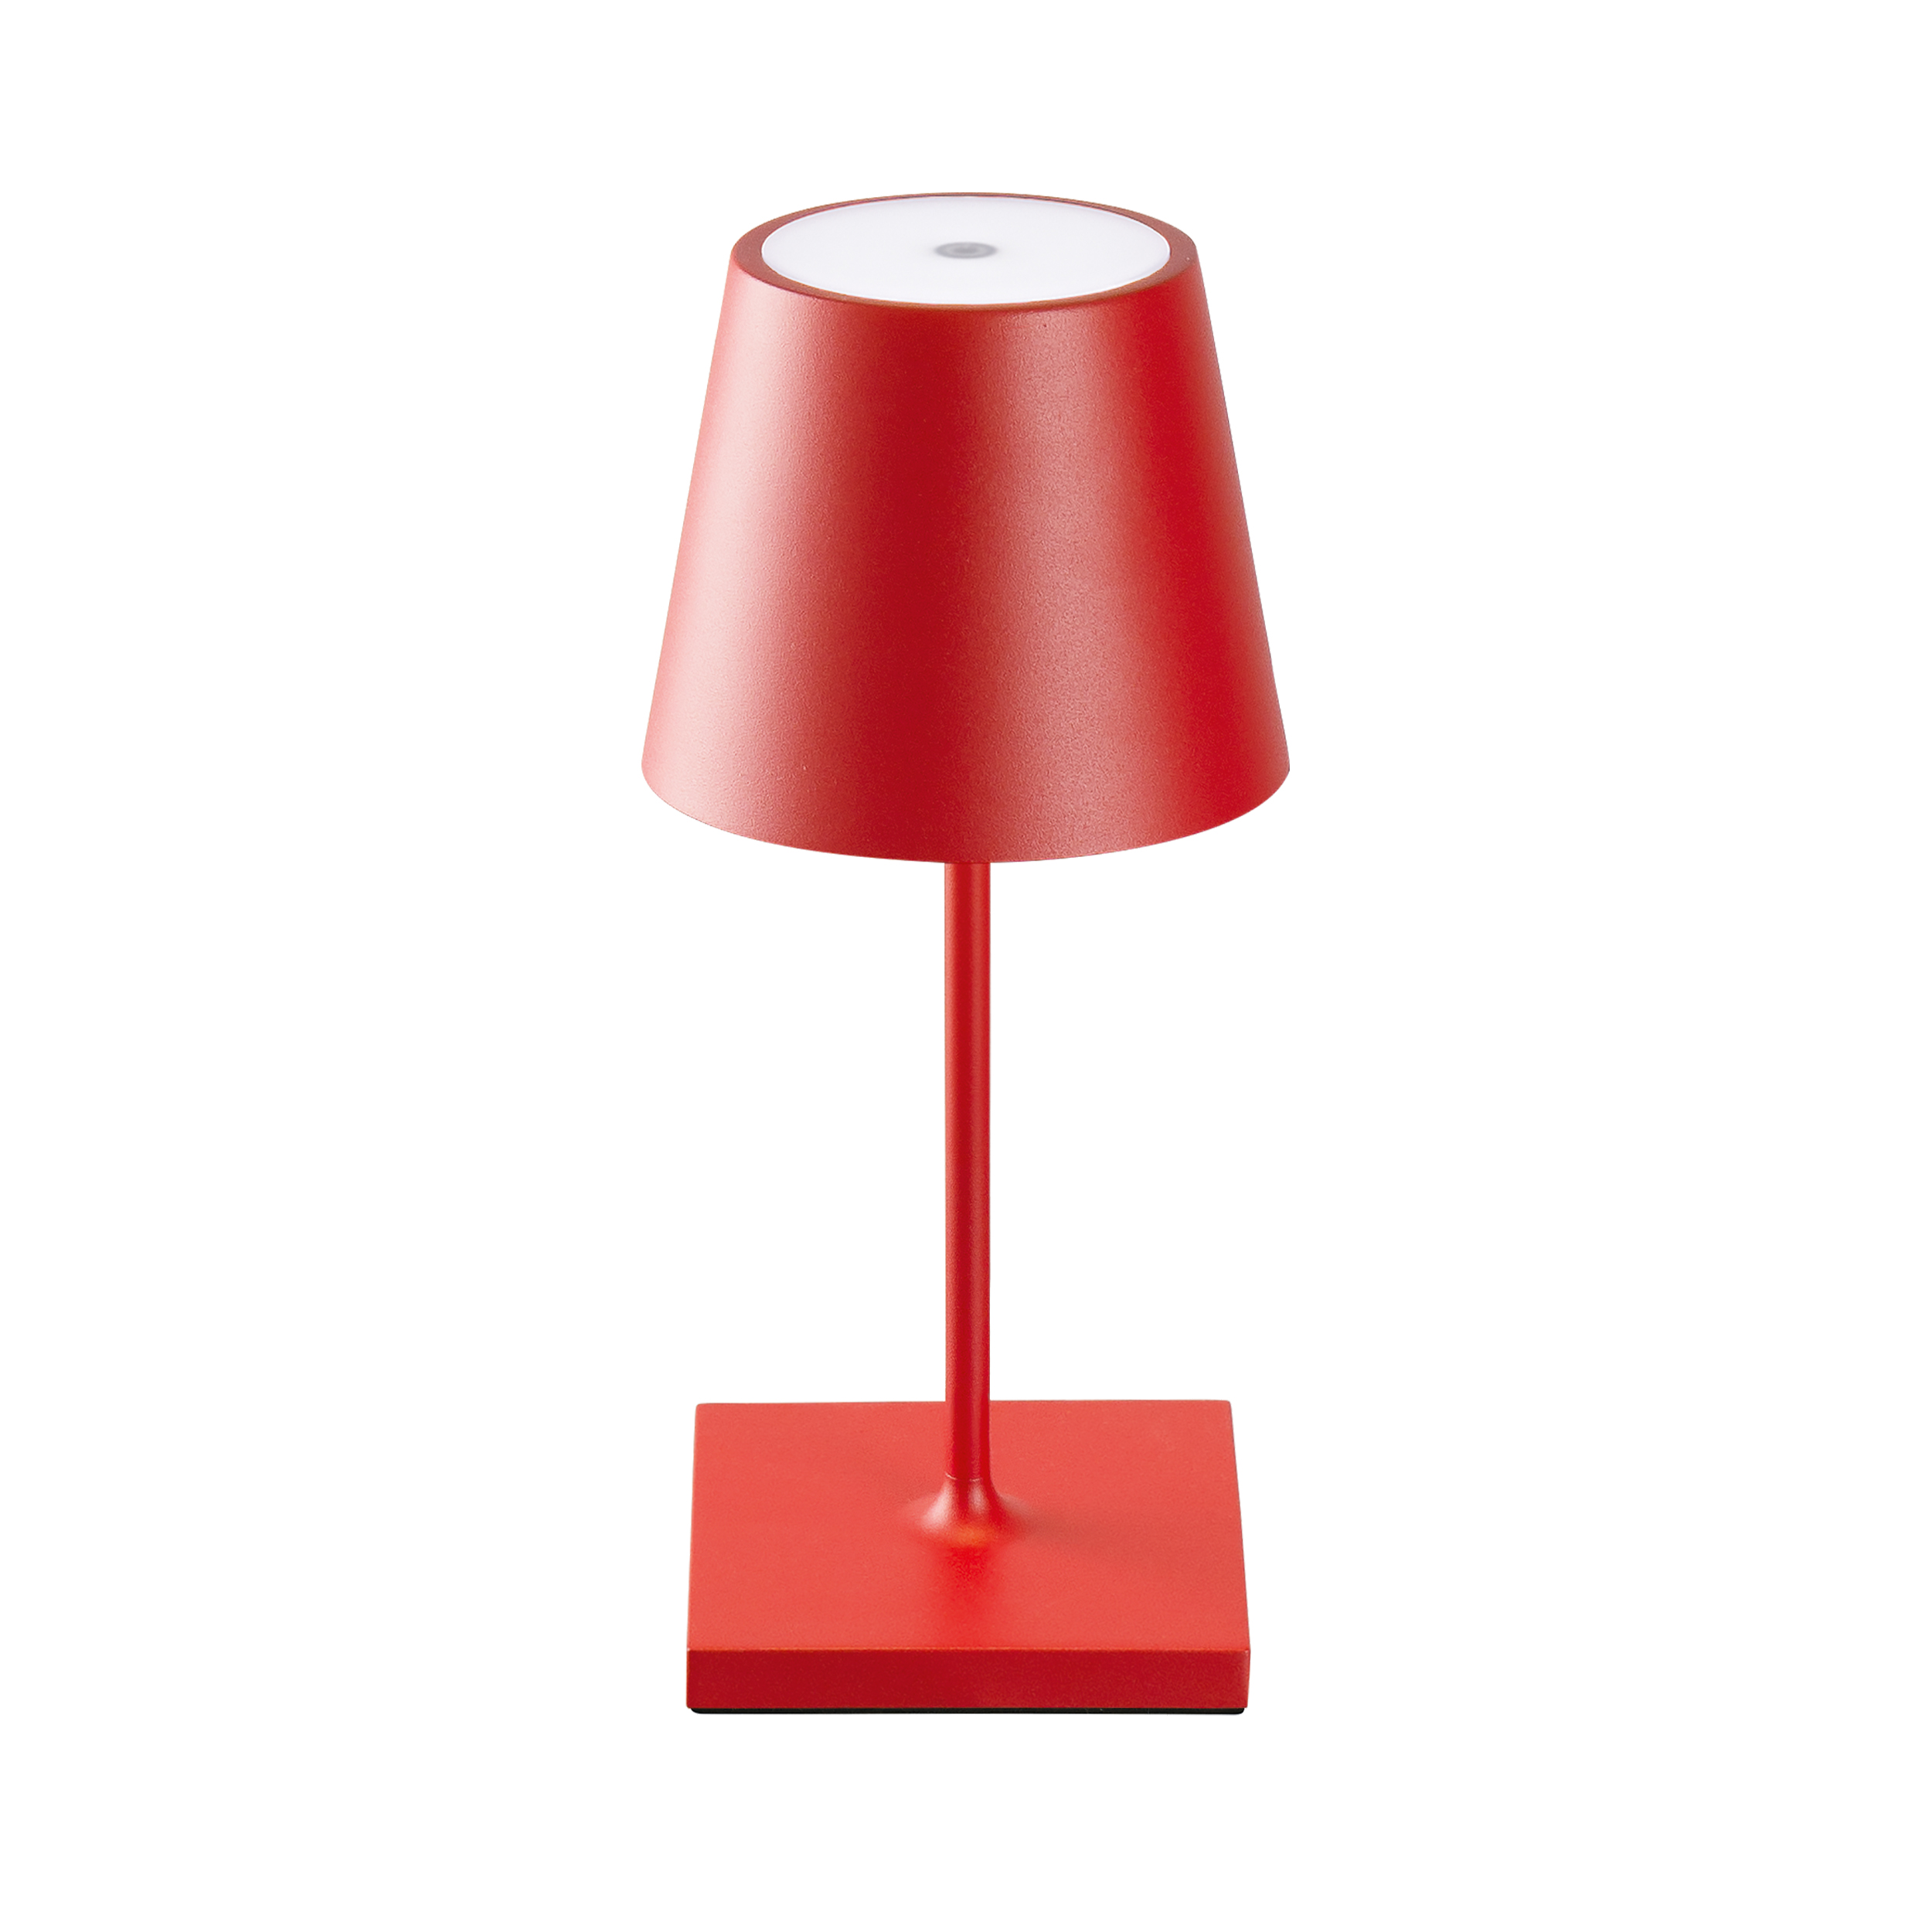 LED SIGOR Table NUINDIE Feuerrot Mini warmweiss Lamp